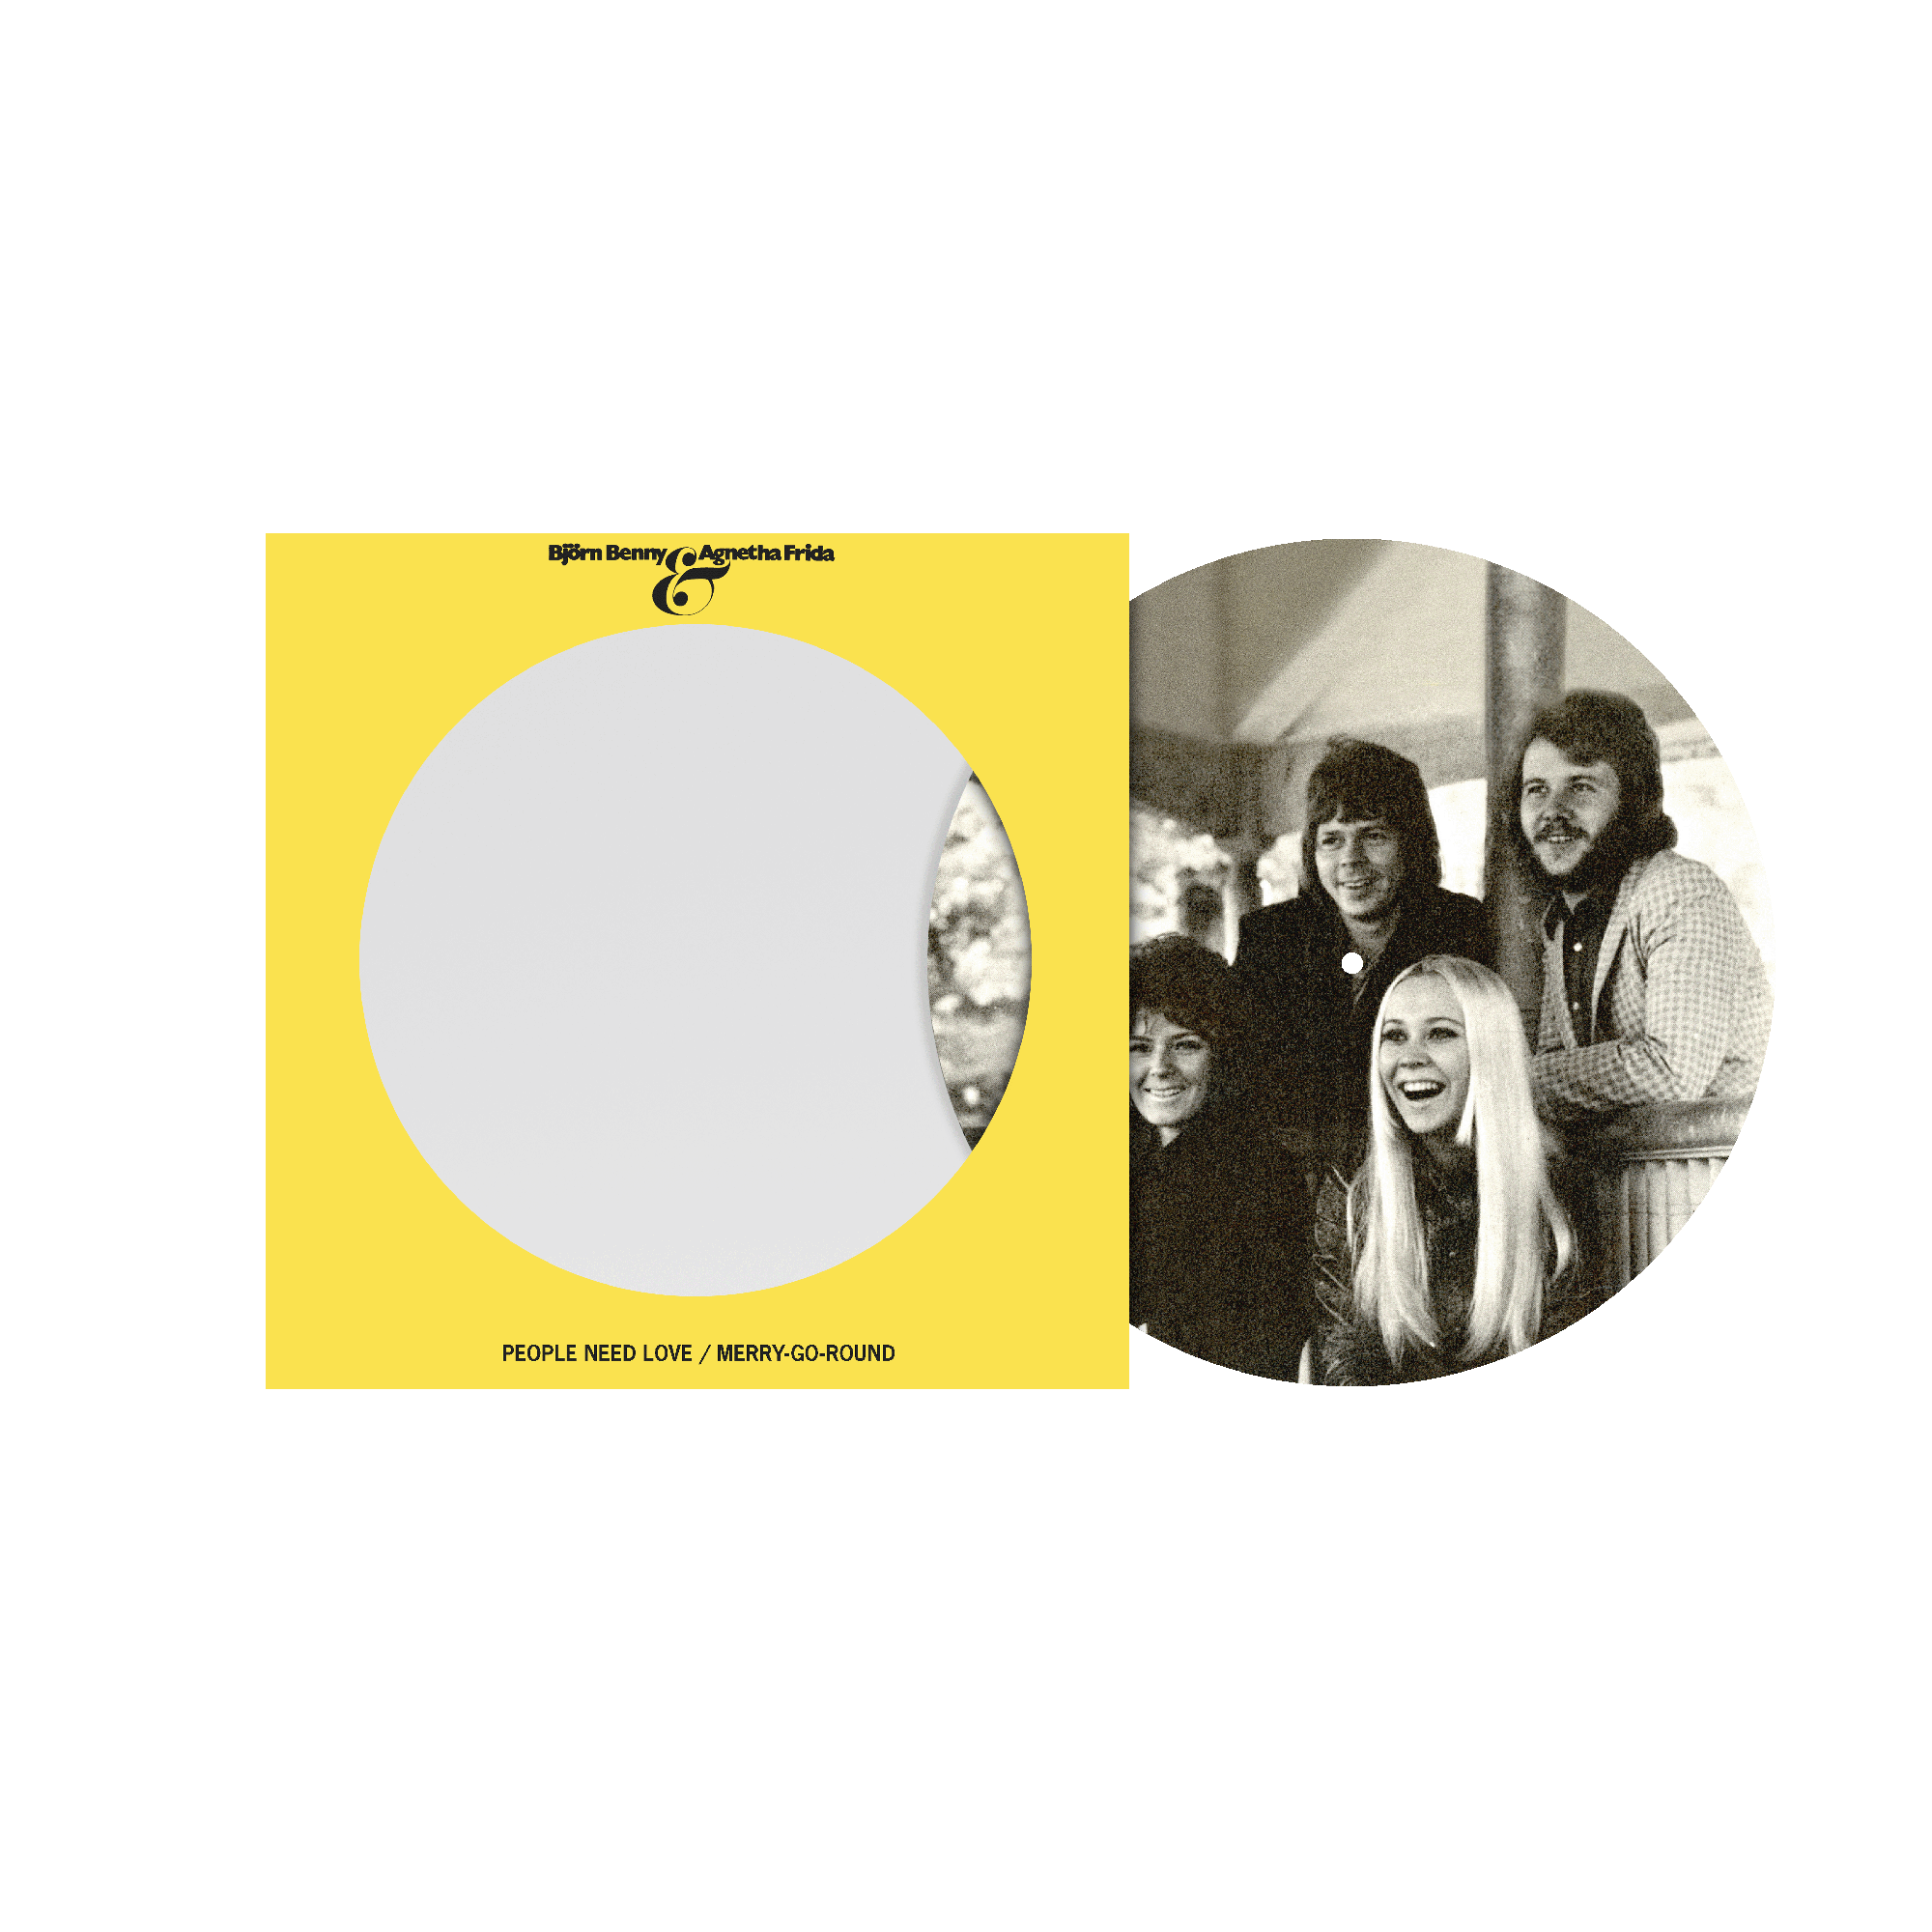 ABBA - People Need Love / Merry-Go-Round: Picture Disc Vinyl 7" Single